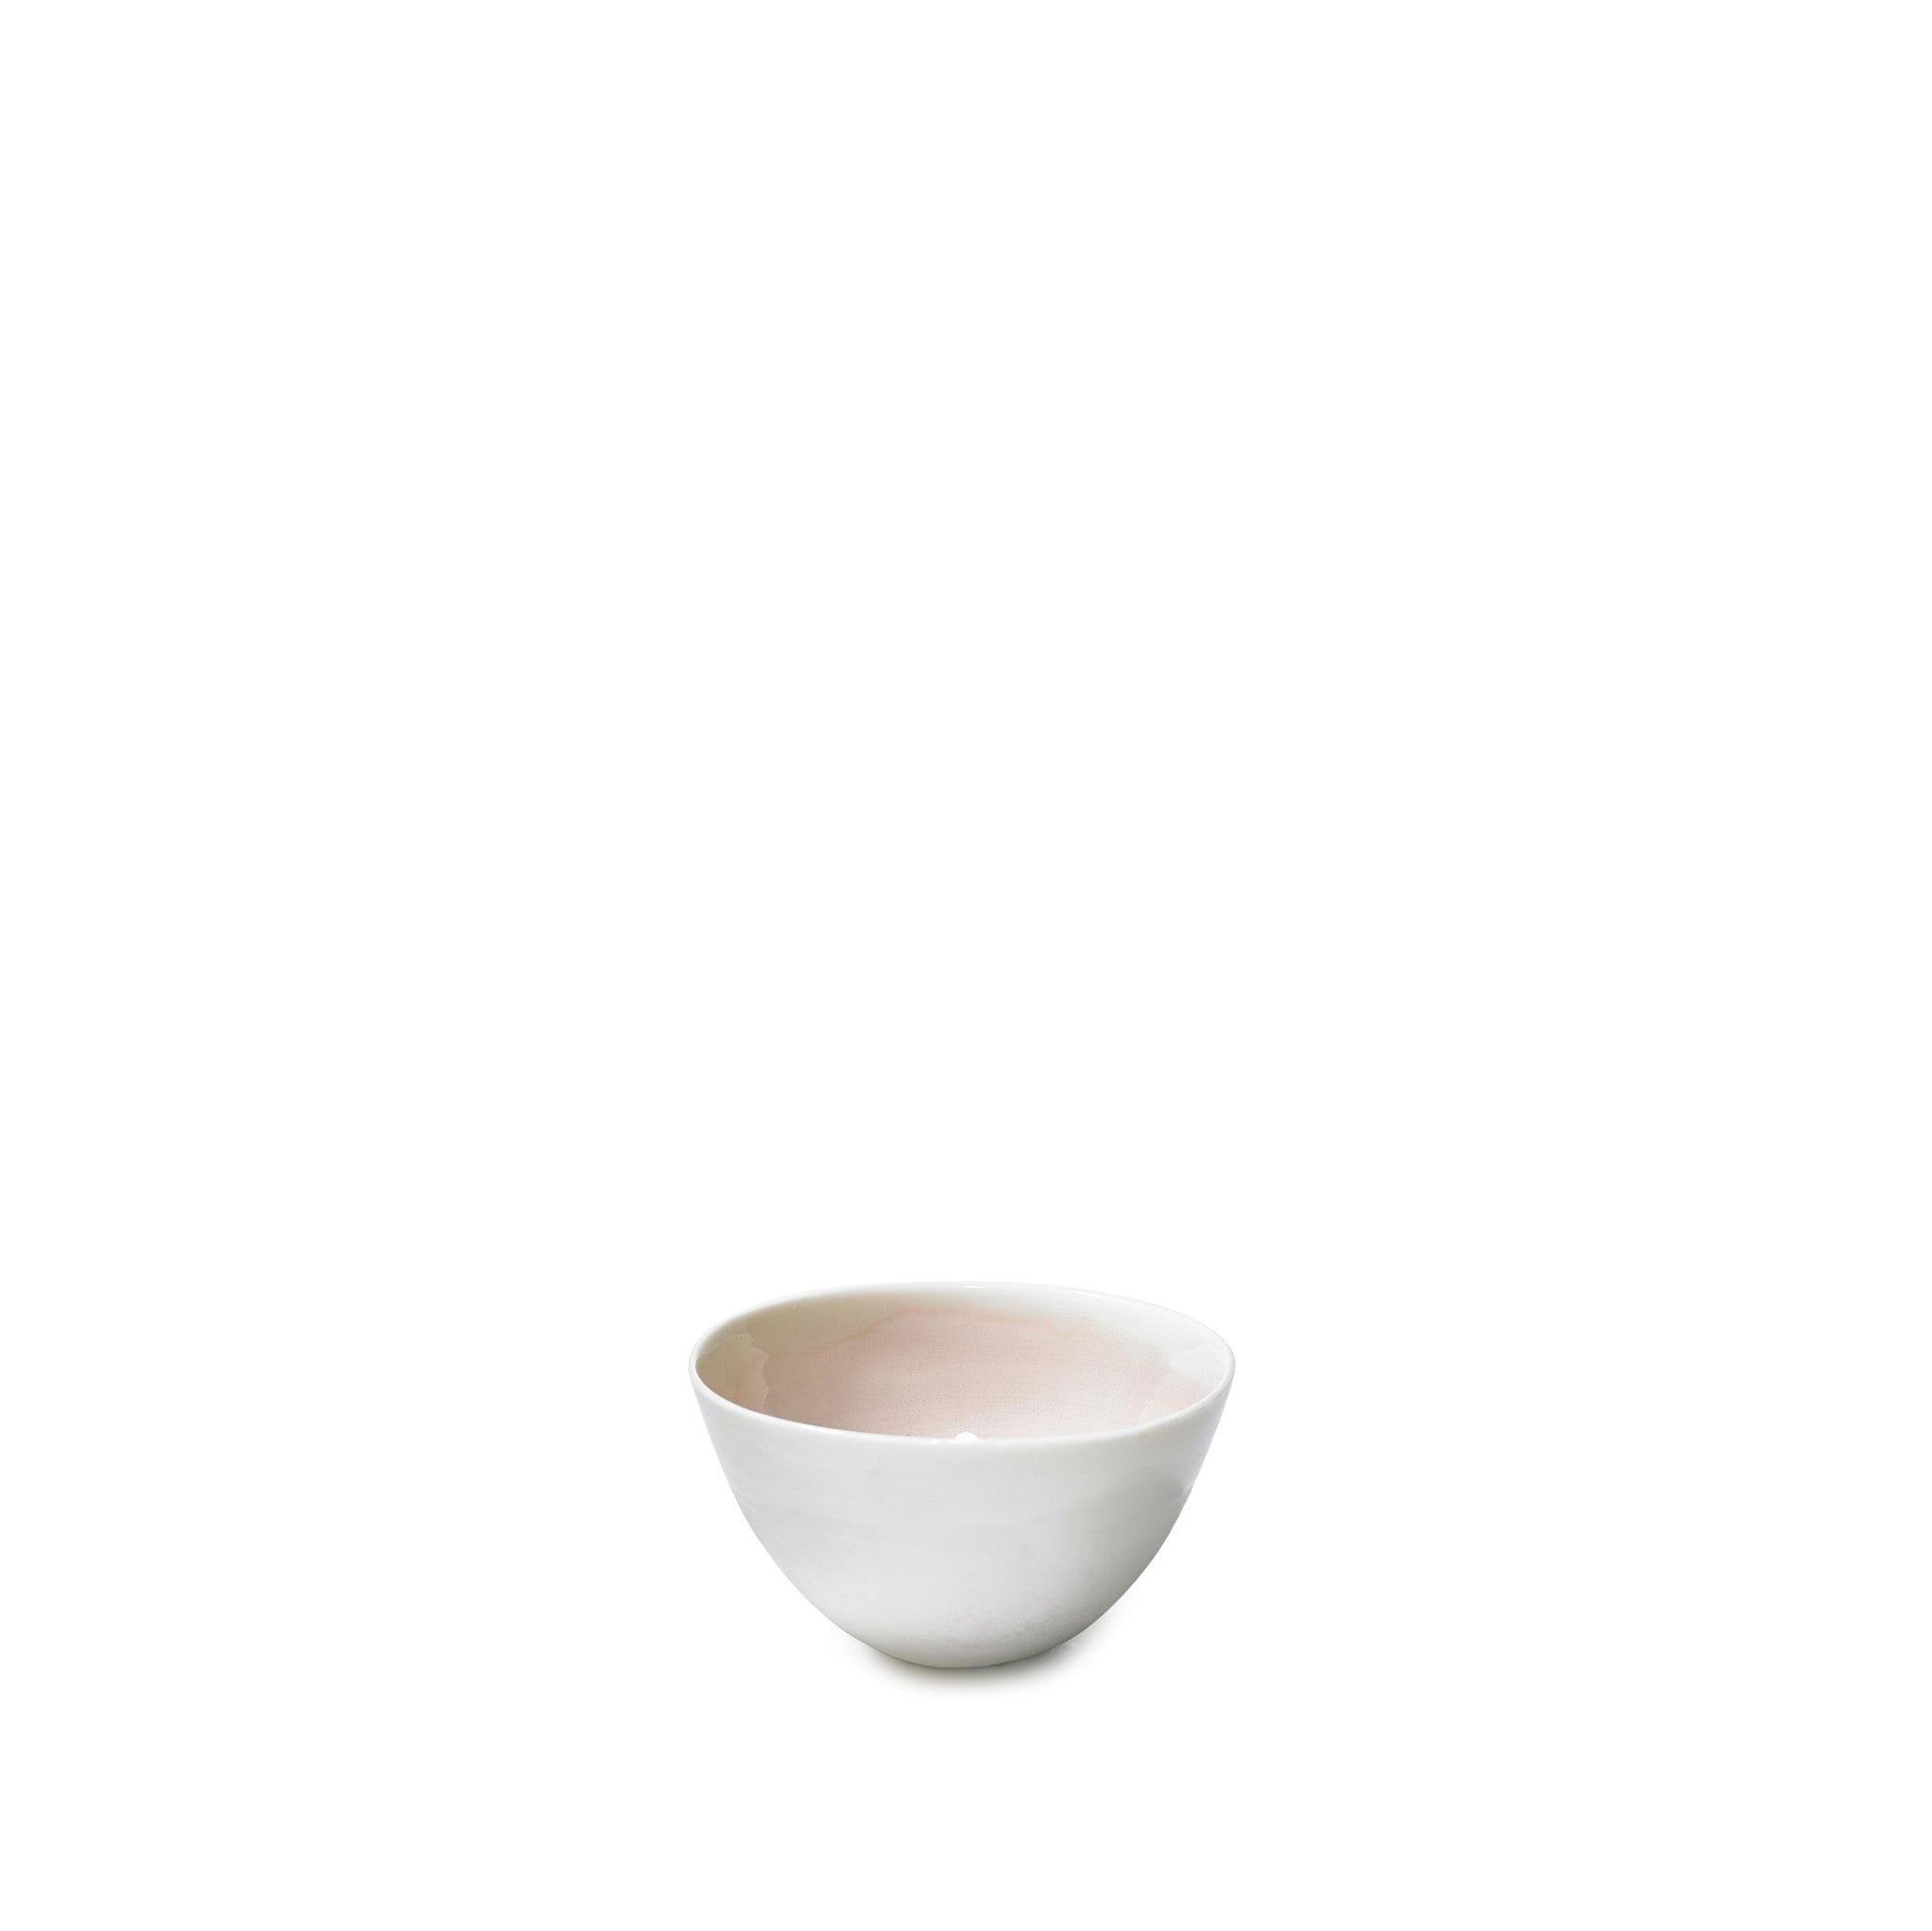 Small Soft Pink Porcelain Bowl with White Edge, 8cm